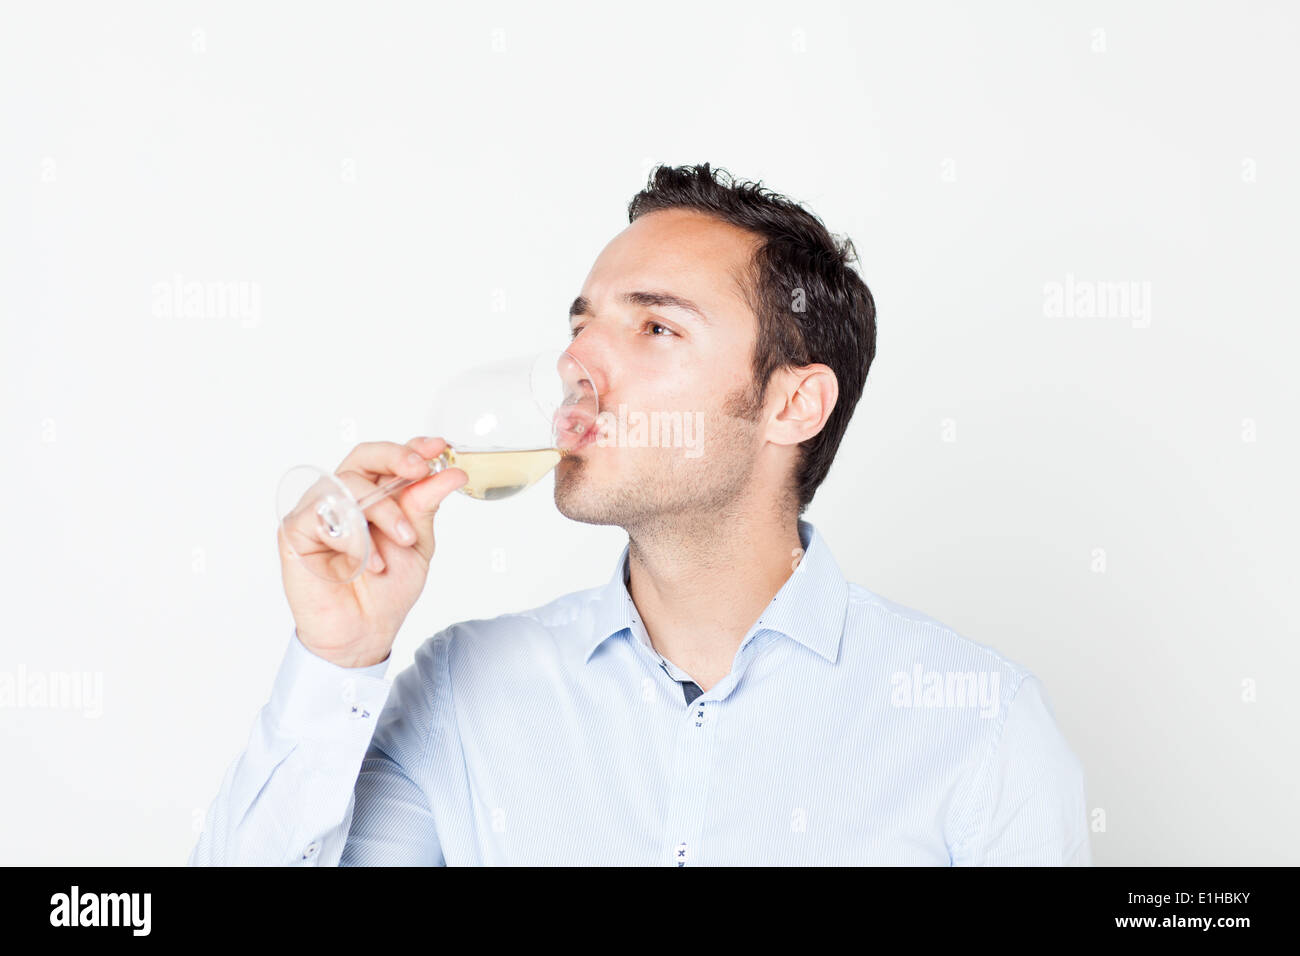 Man drinking a glass of white wine Stock Photo